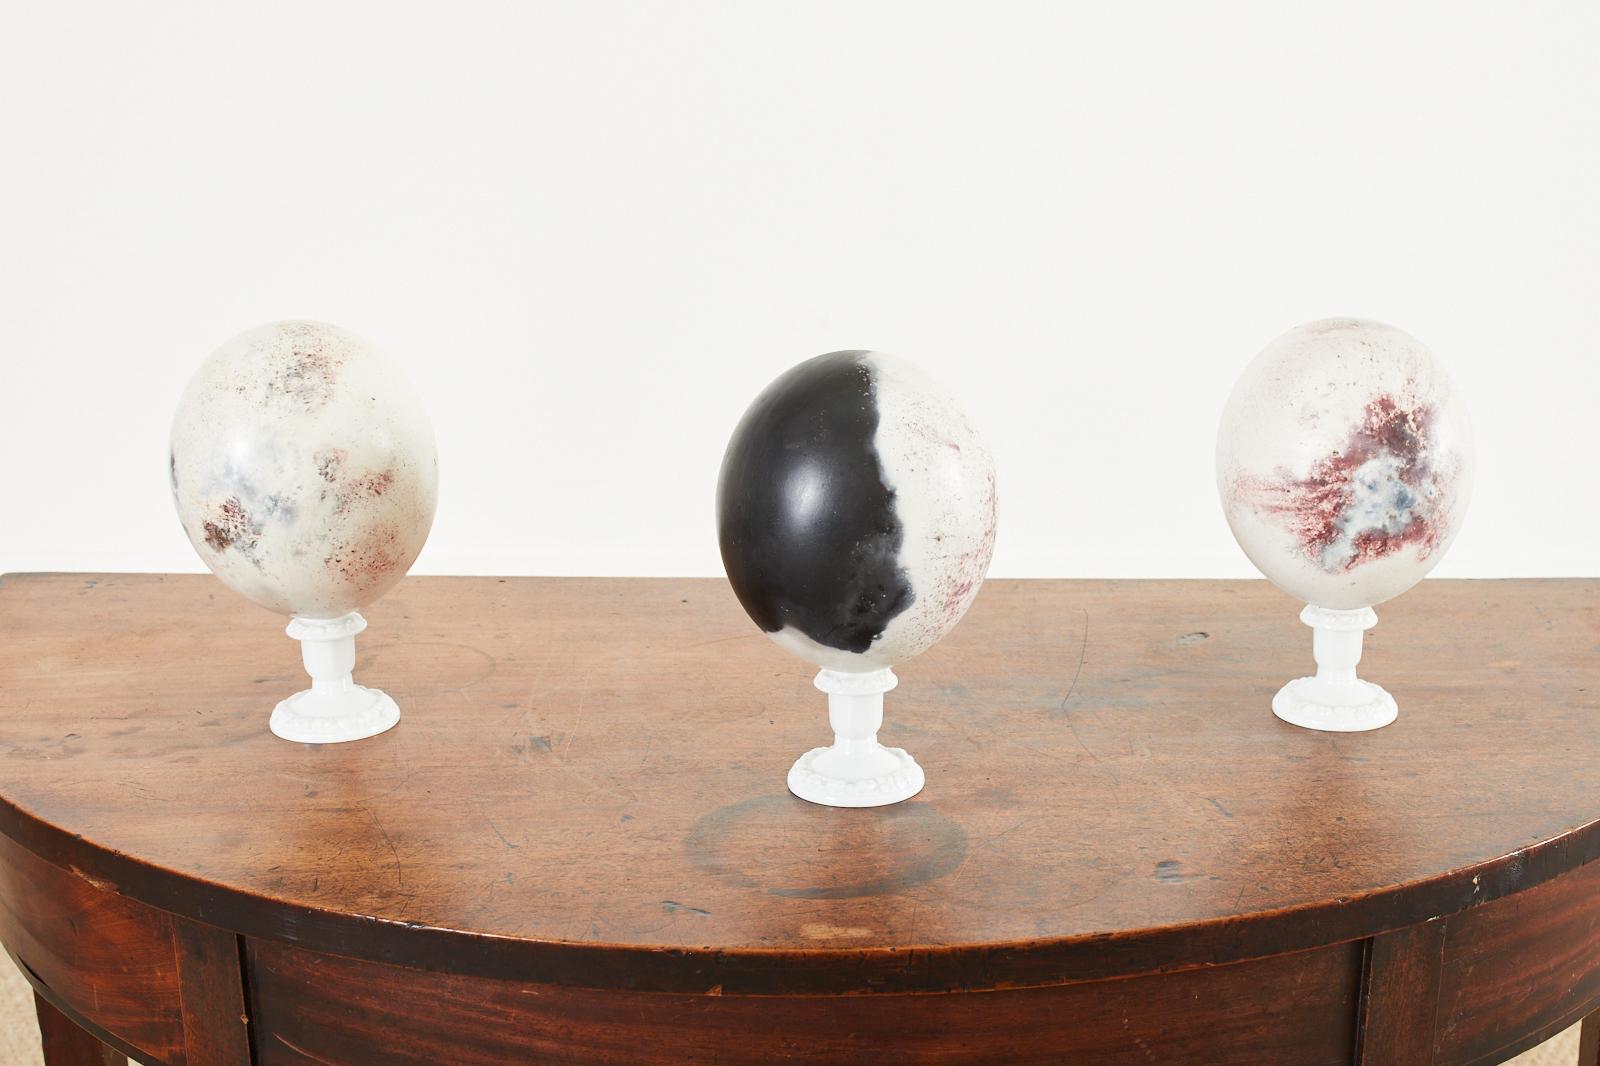 Fascinating set of three ostrich egg specimens that have been painted or dyed. Beautifully crafted pieces perfect for a cabinet of curiosities or display on a pedestal. Each one is unique and different. Display stands are not included, the price is